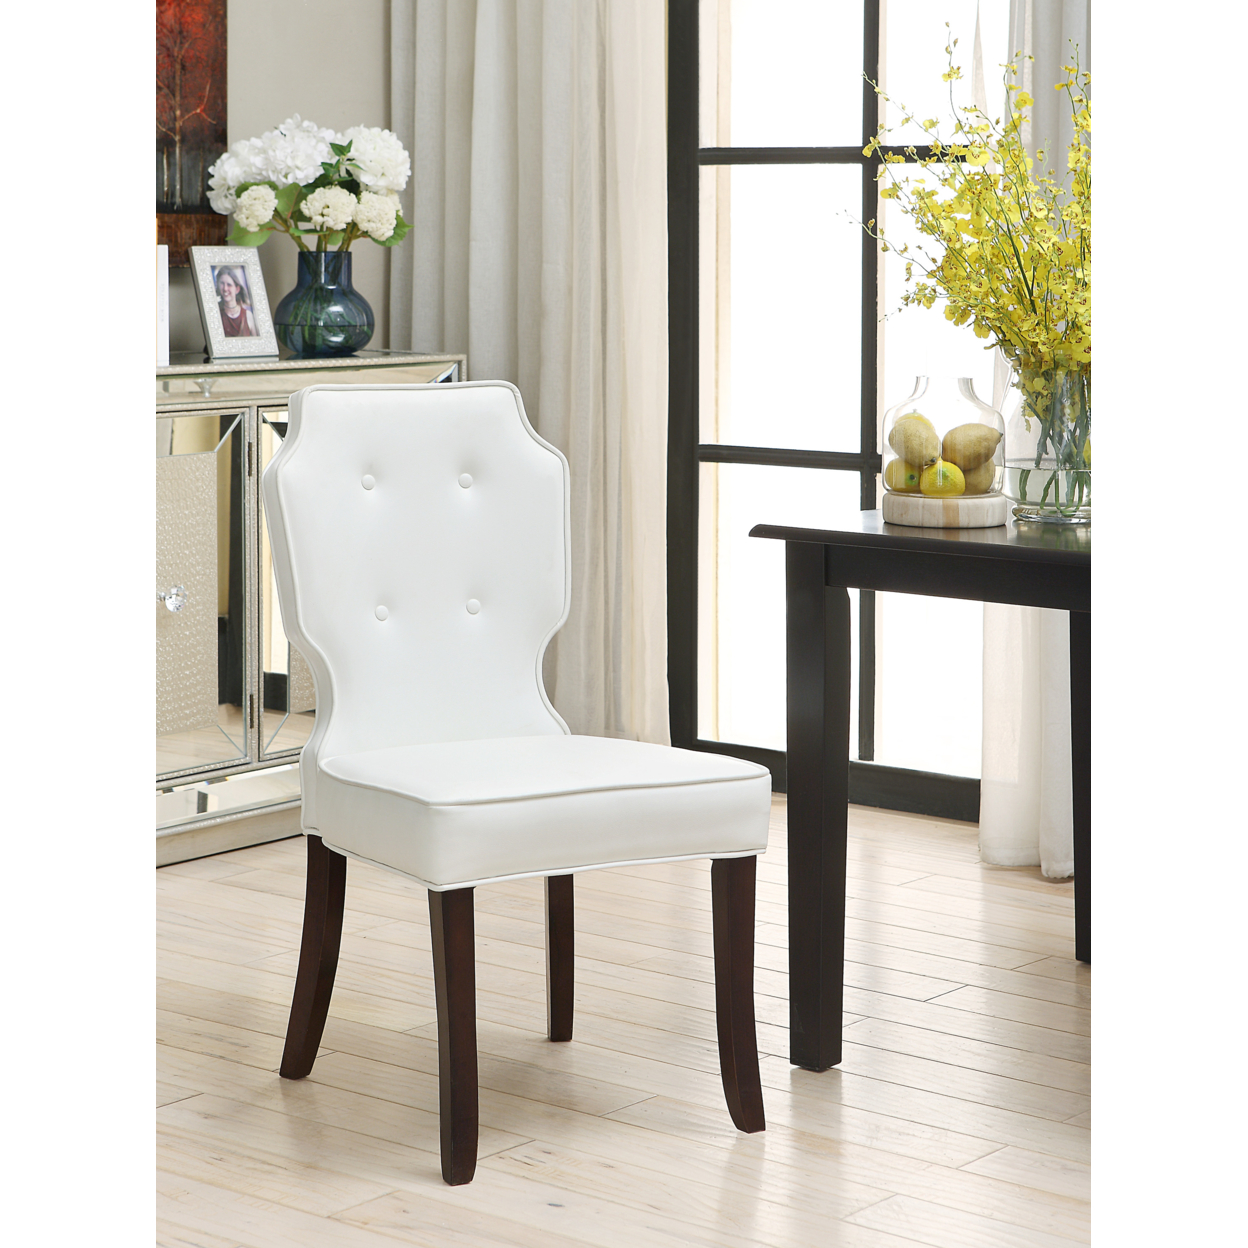 Jones Dining Side Accent Chair Button Tufted Pebble Grain PU Leather Espresso Wood Frame, Set Of 2 - White